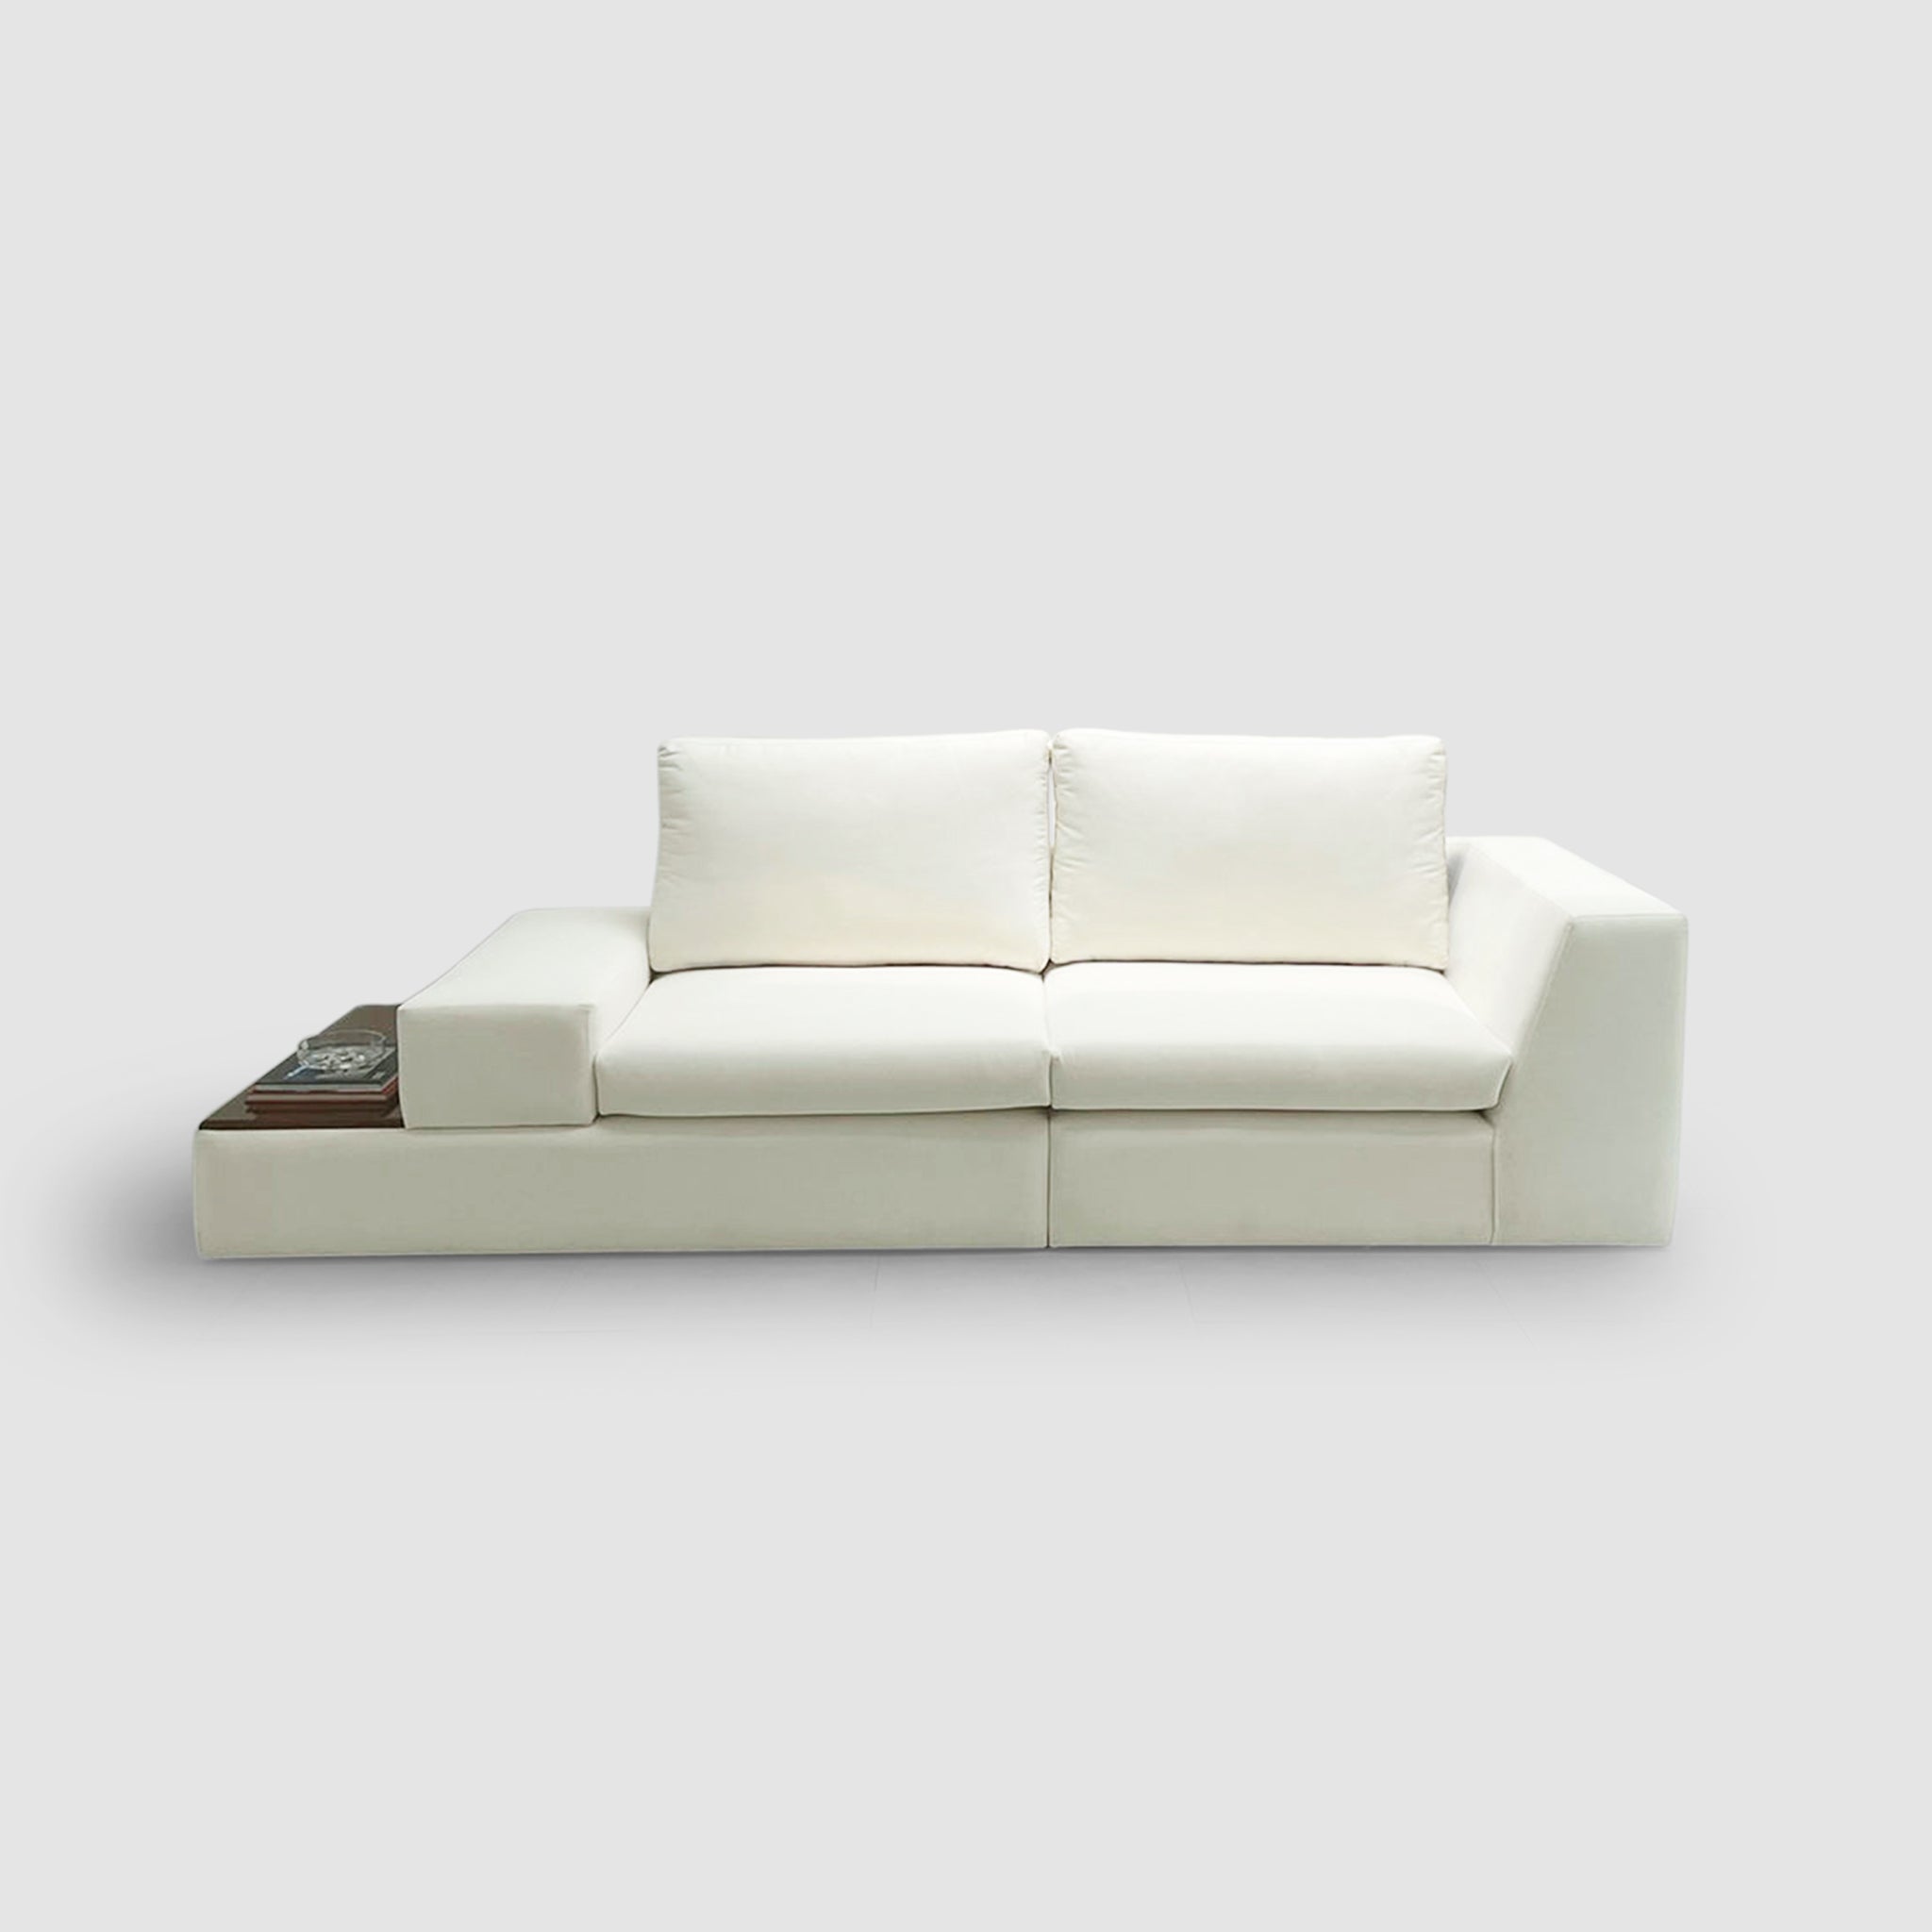 Modern white sofa with built-in side table, offering both comfort and functionality for a contemporary living room.